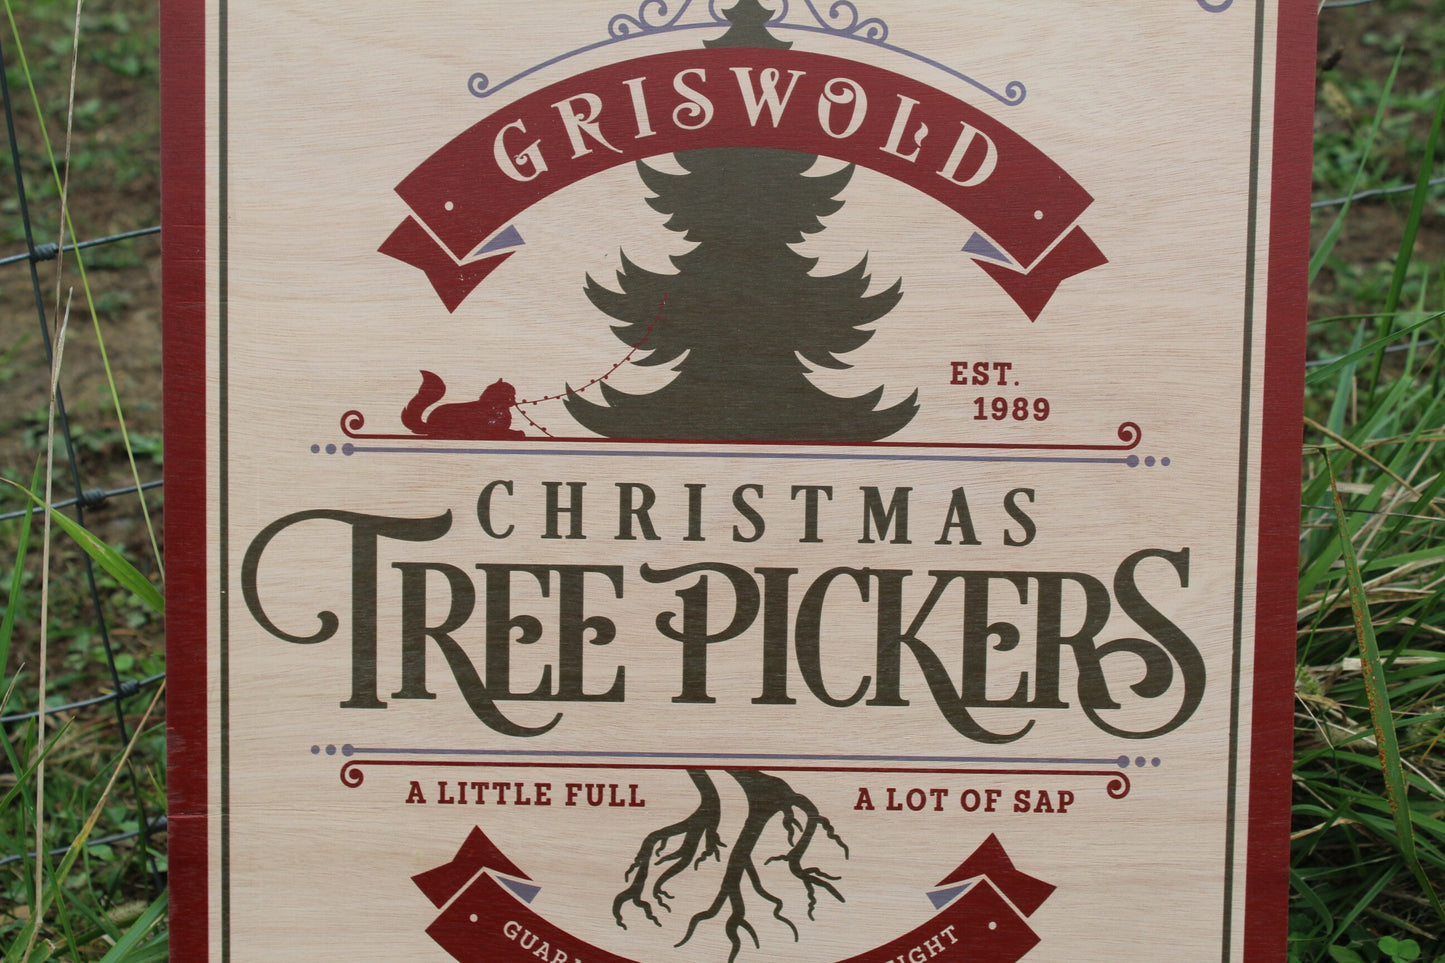 Griswolds Christmas Tree Farm Large Holiday Winter Wood Sign Tree Pickers Cat Eating Lights Comedy Rustic Movie Decoration Wall Hanging